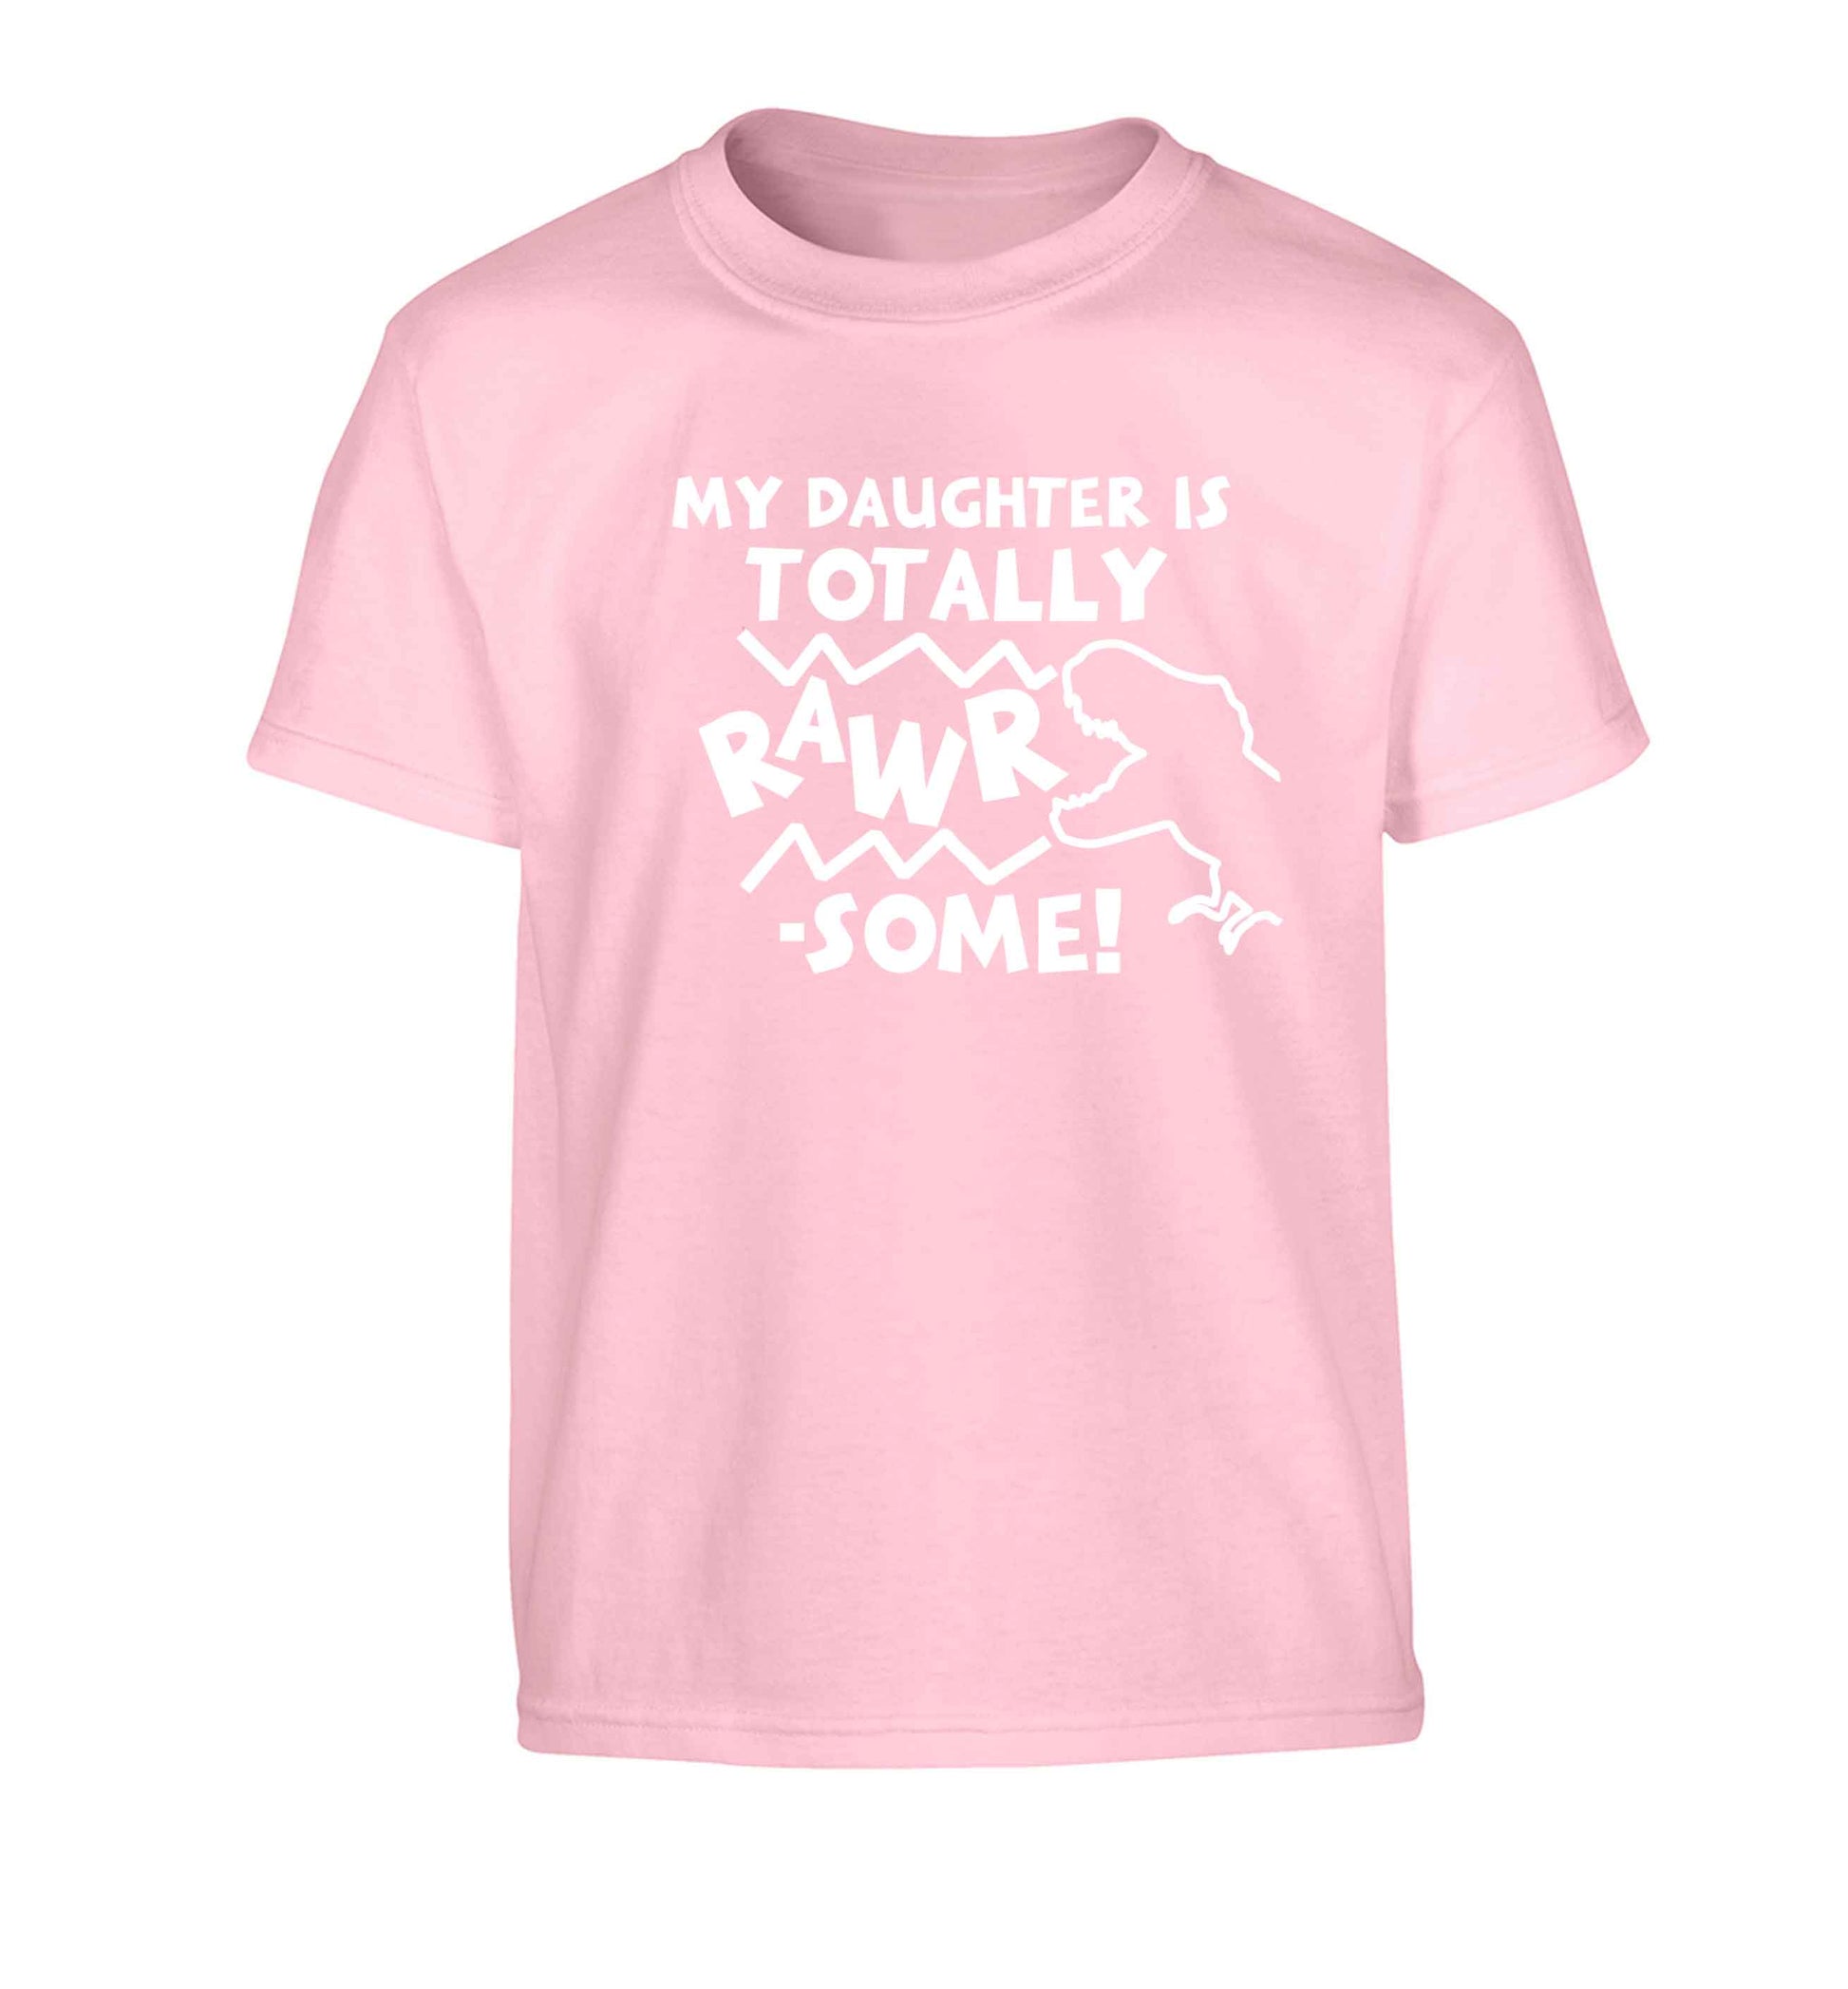 My daughter is totally rawrsome Children's light pink Tshirt 12-13 Years